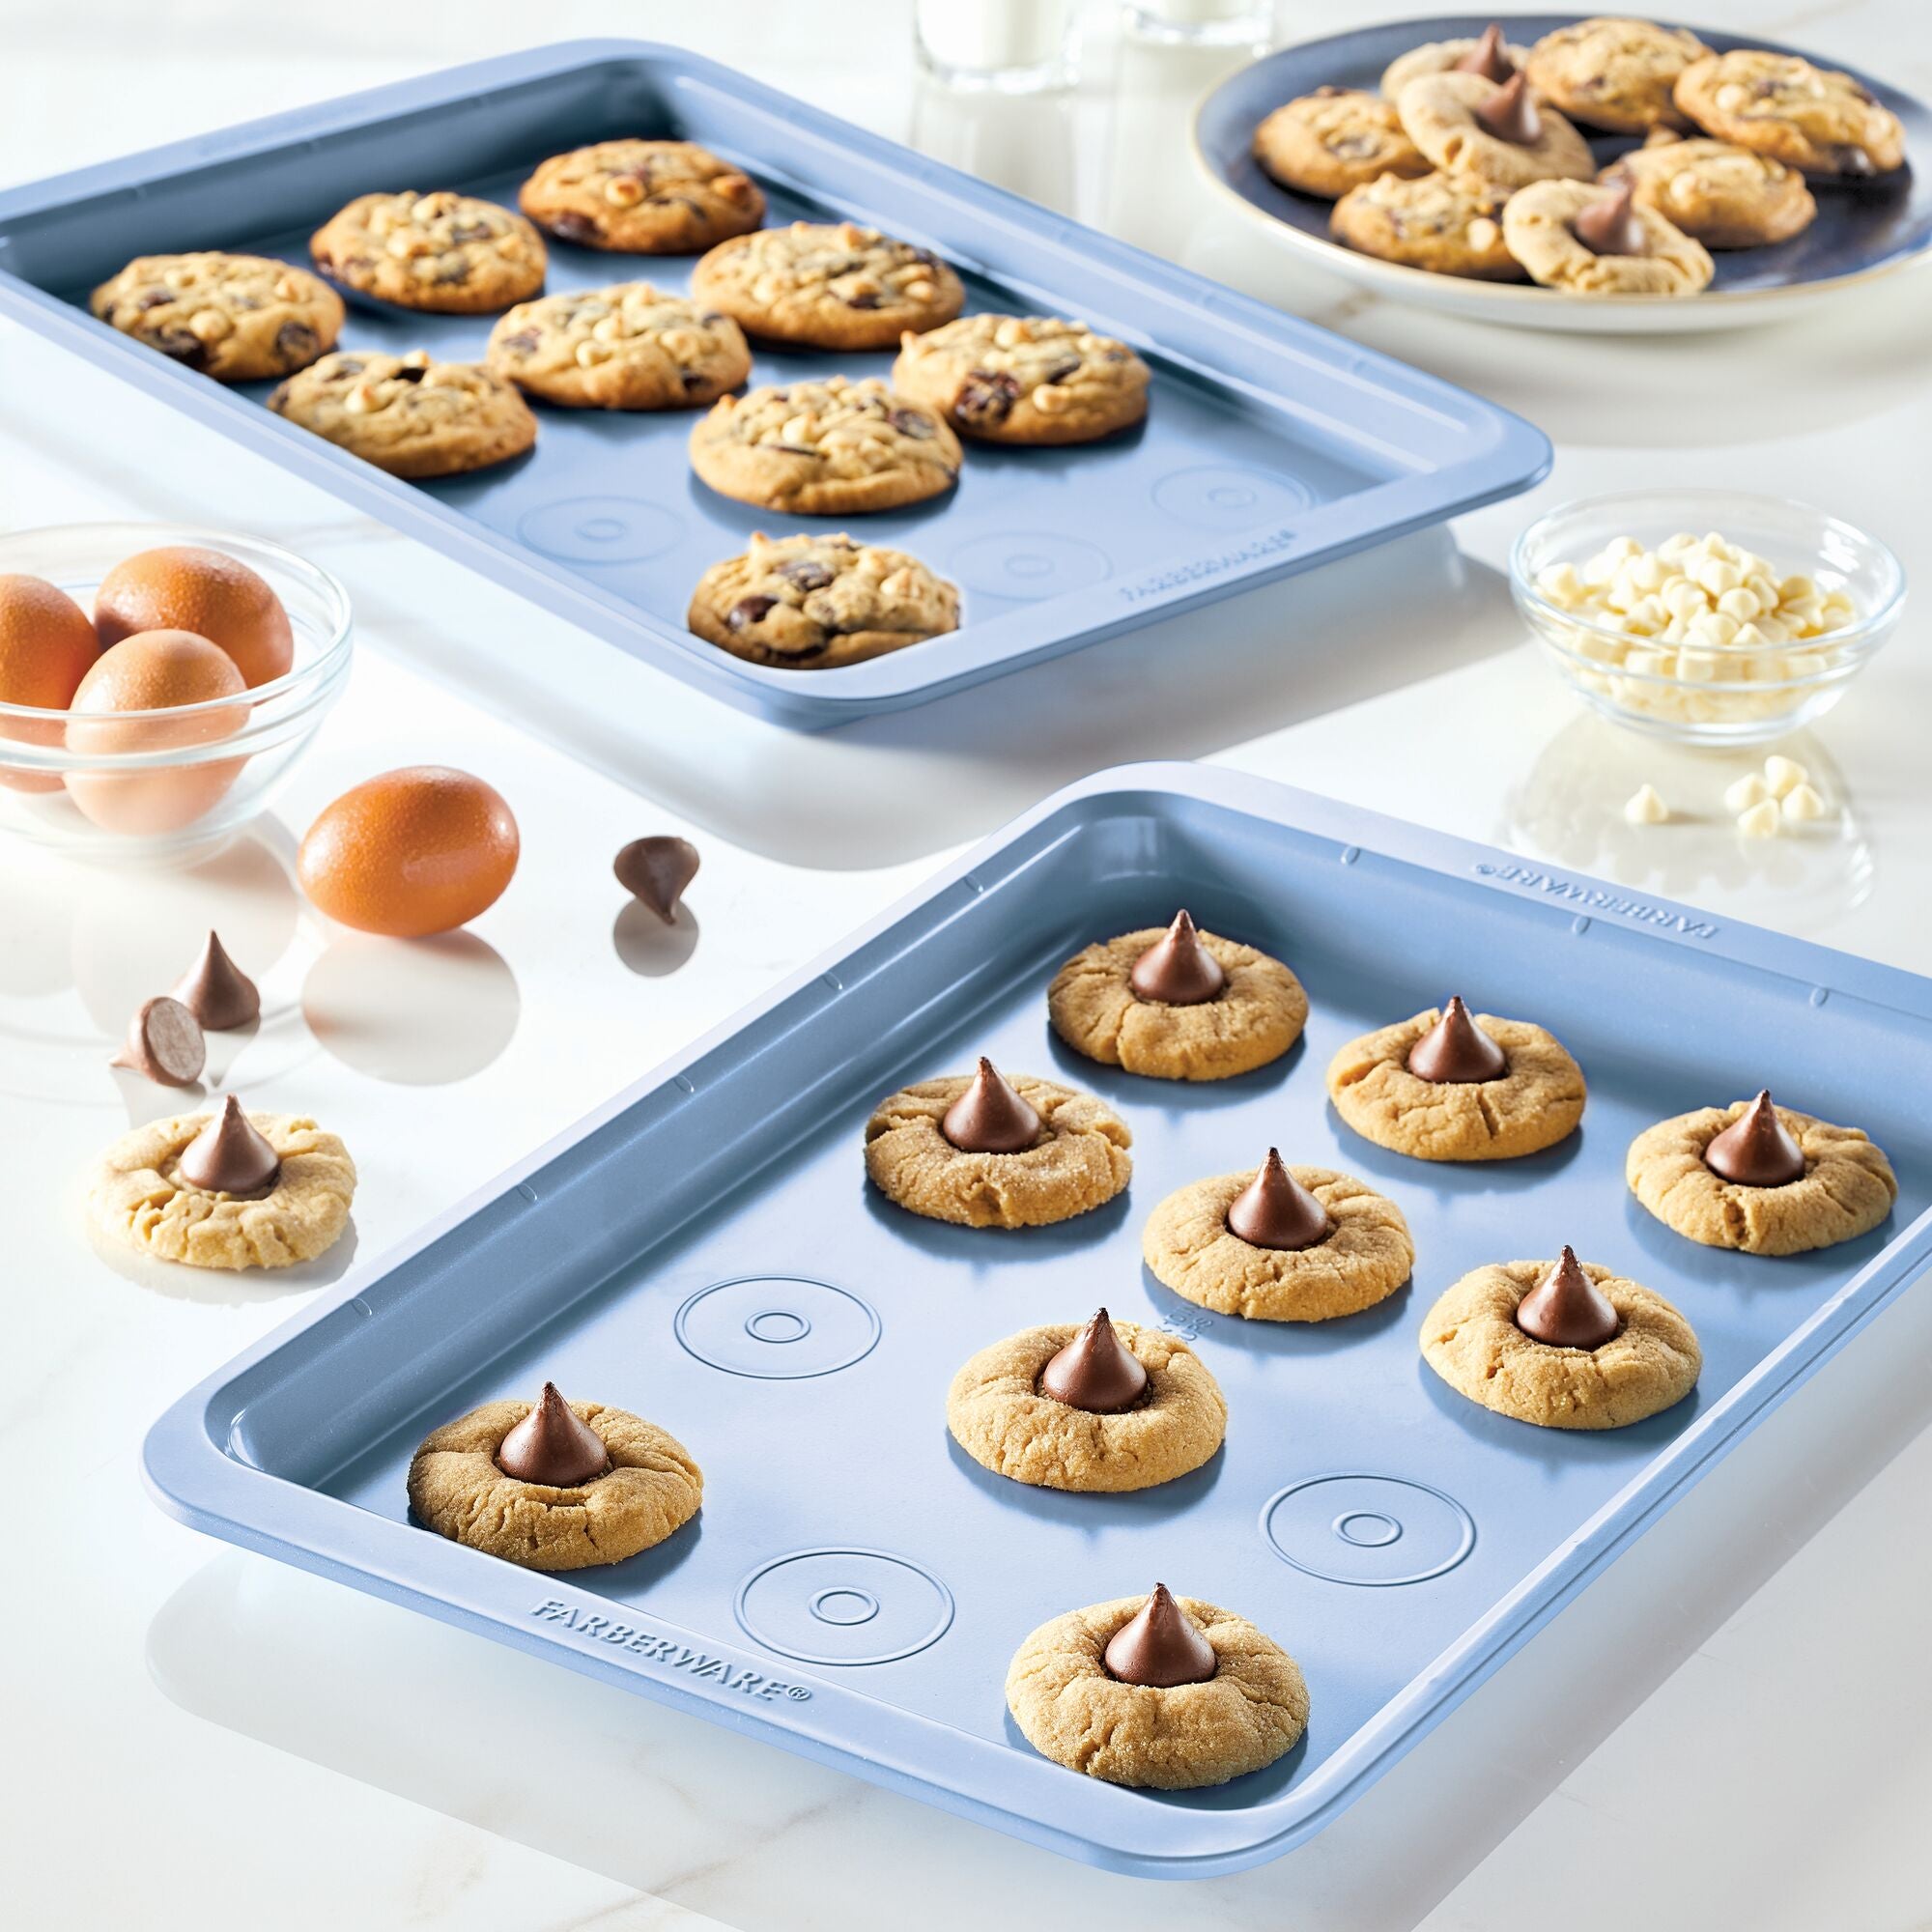 Farberware Easy Solutions Nonstick Bakeware Cookie Pan Baking Sheet, 11  Inch X 17 Inch, Blue & Reviews